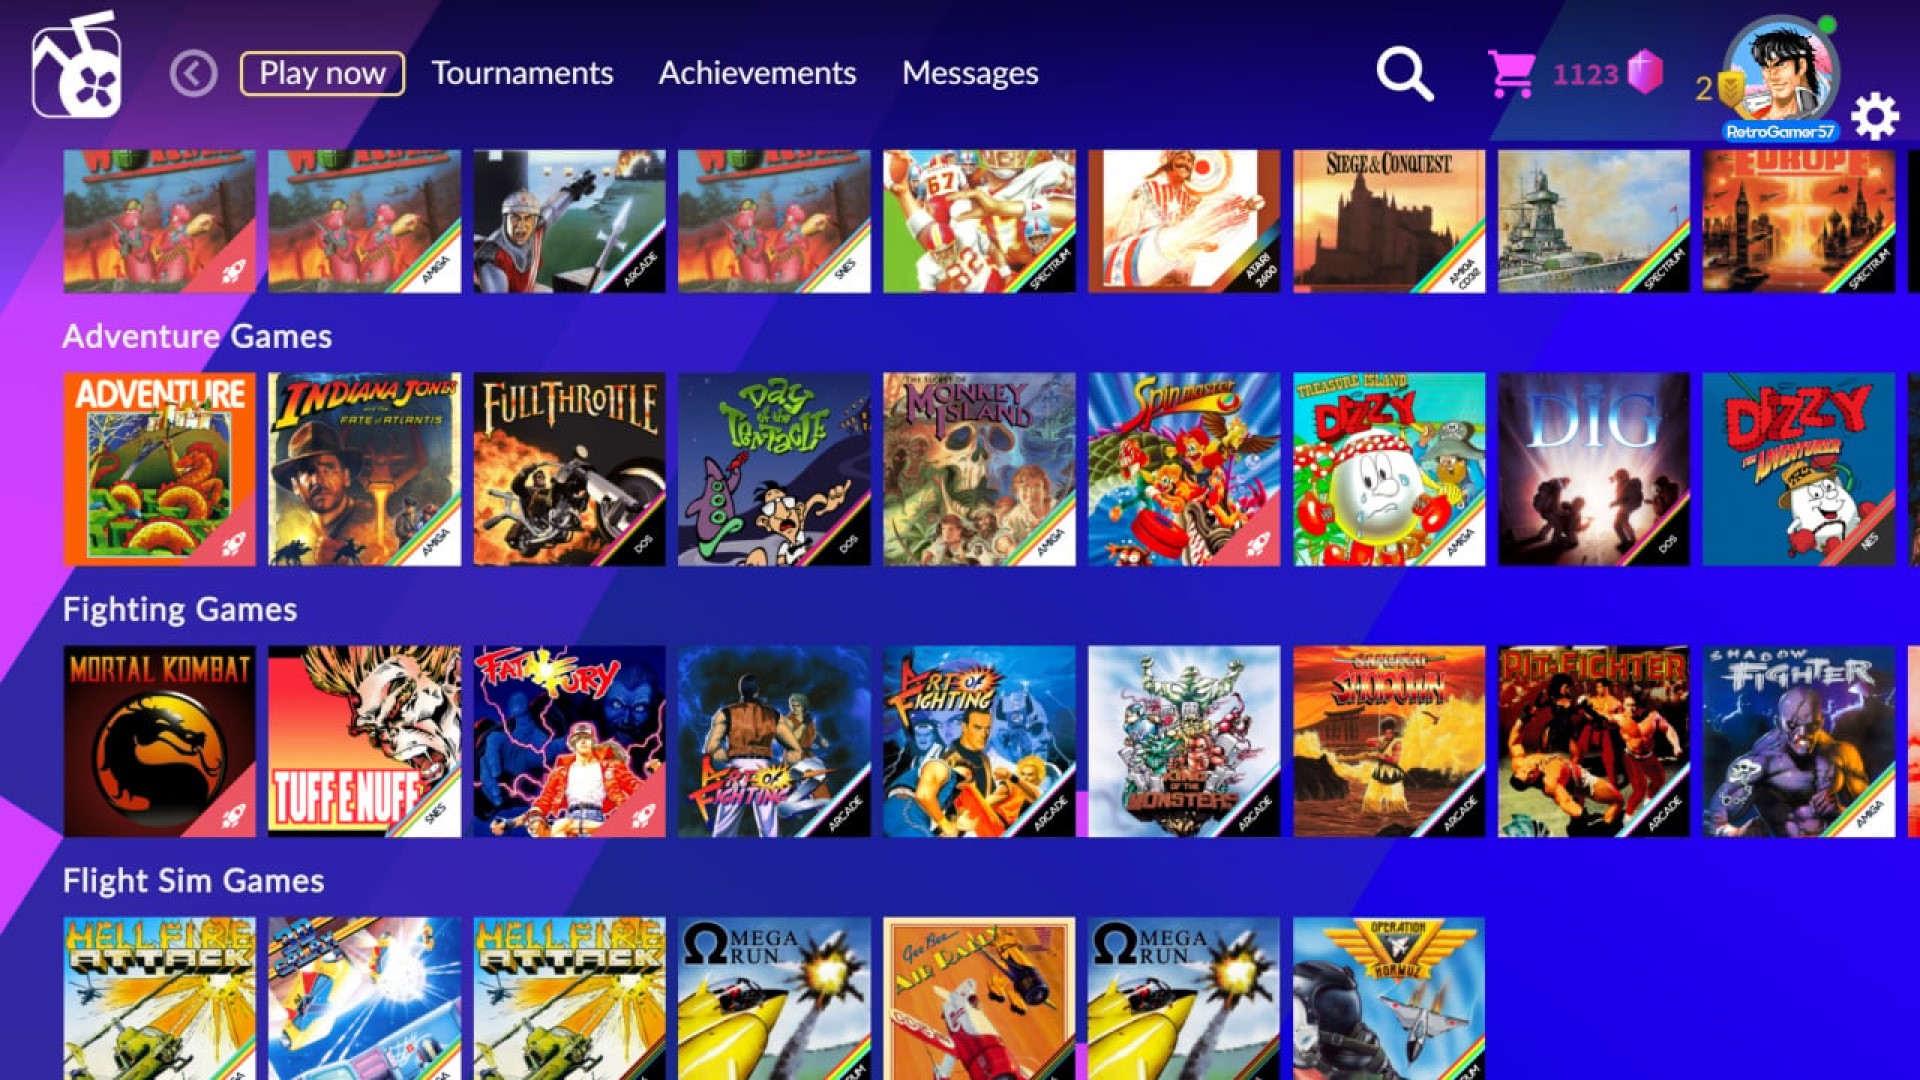 Antstream Arcade, a Retro Streaming Service with Over 1,300 Games, is Coming to Xbox